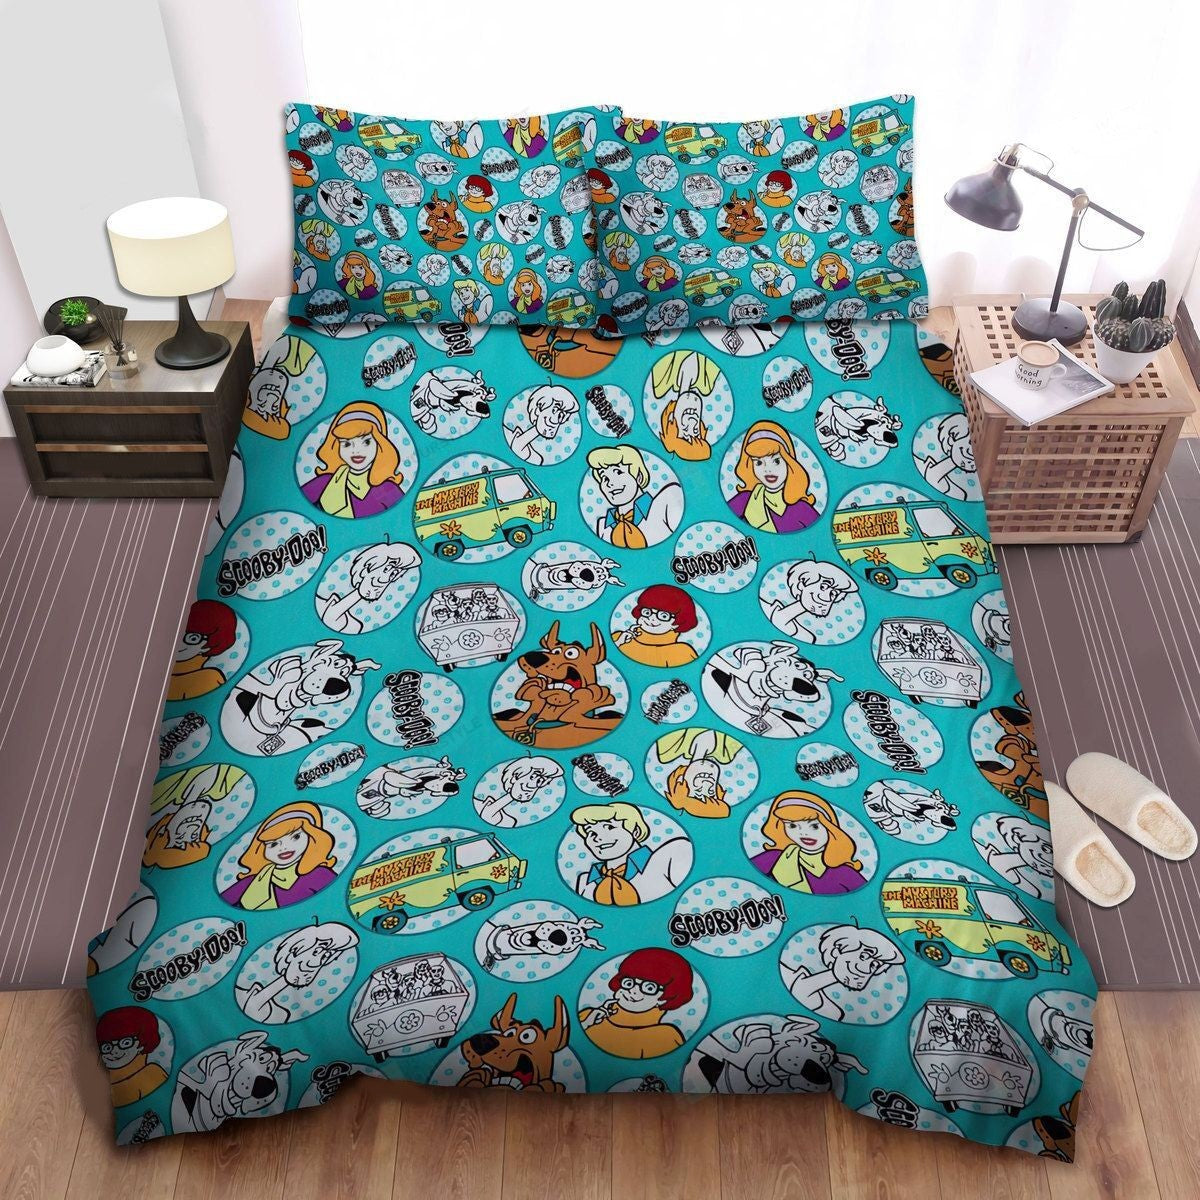 Scooby Doo Bedding Set Scooby Doo Characters Circle Frame Duvet Covers Blue Unique Gift